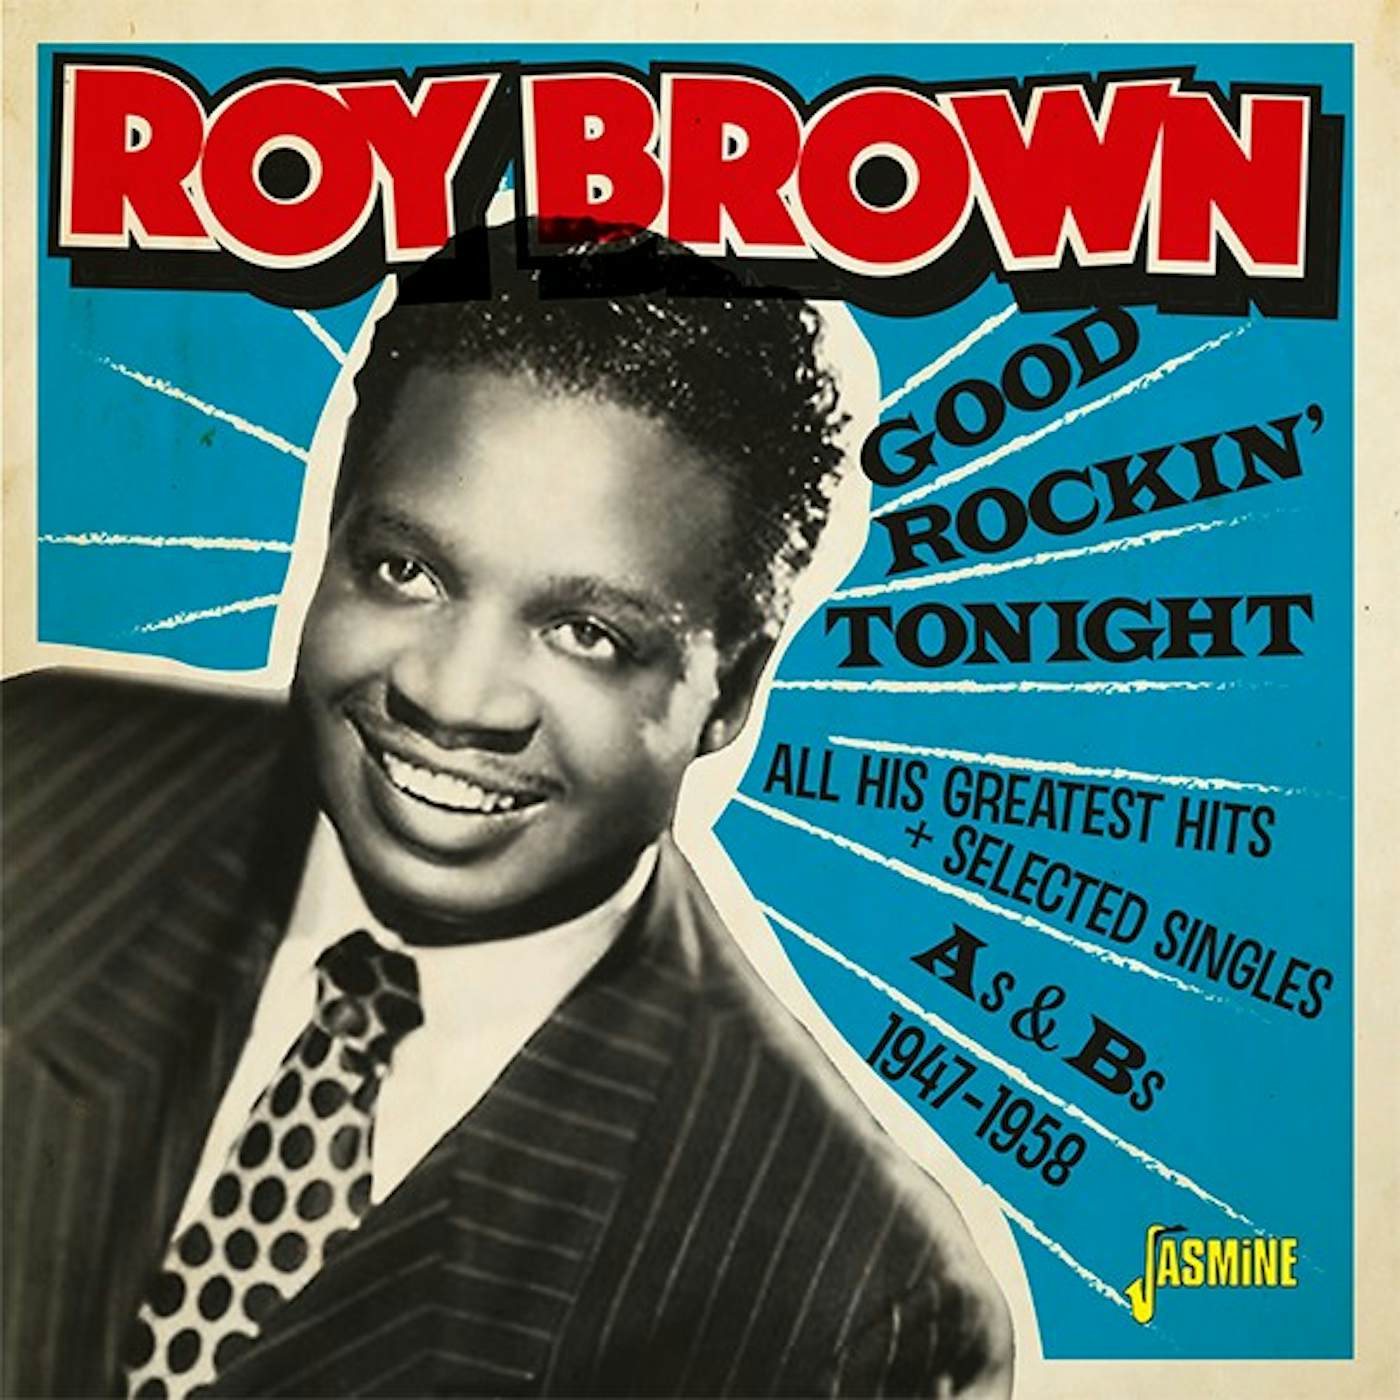 Roy Brown GOOD ROCKIN TONIGHT & ALL HIS GREATEST HITS CD